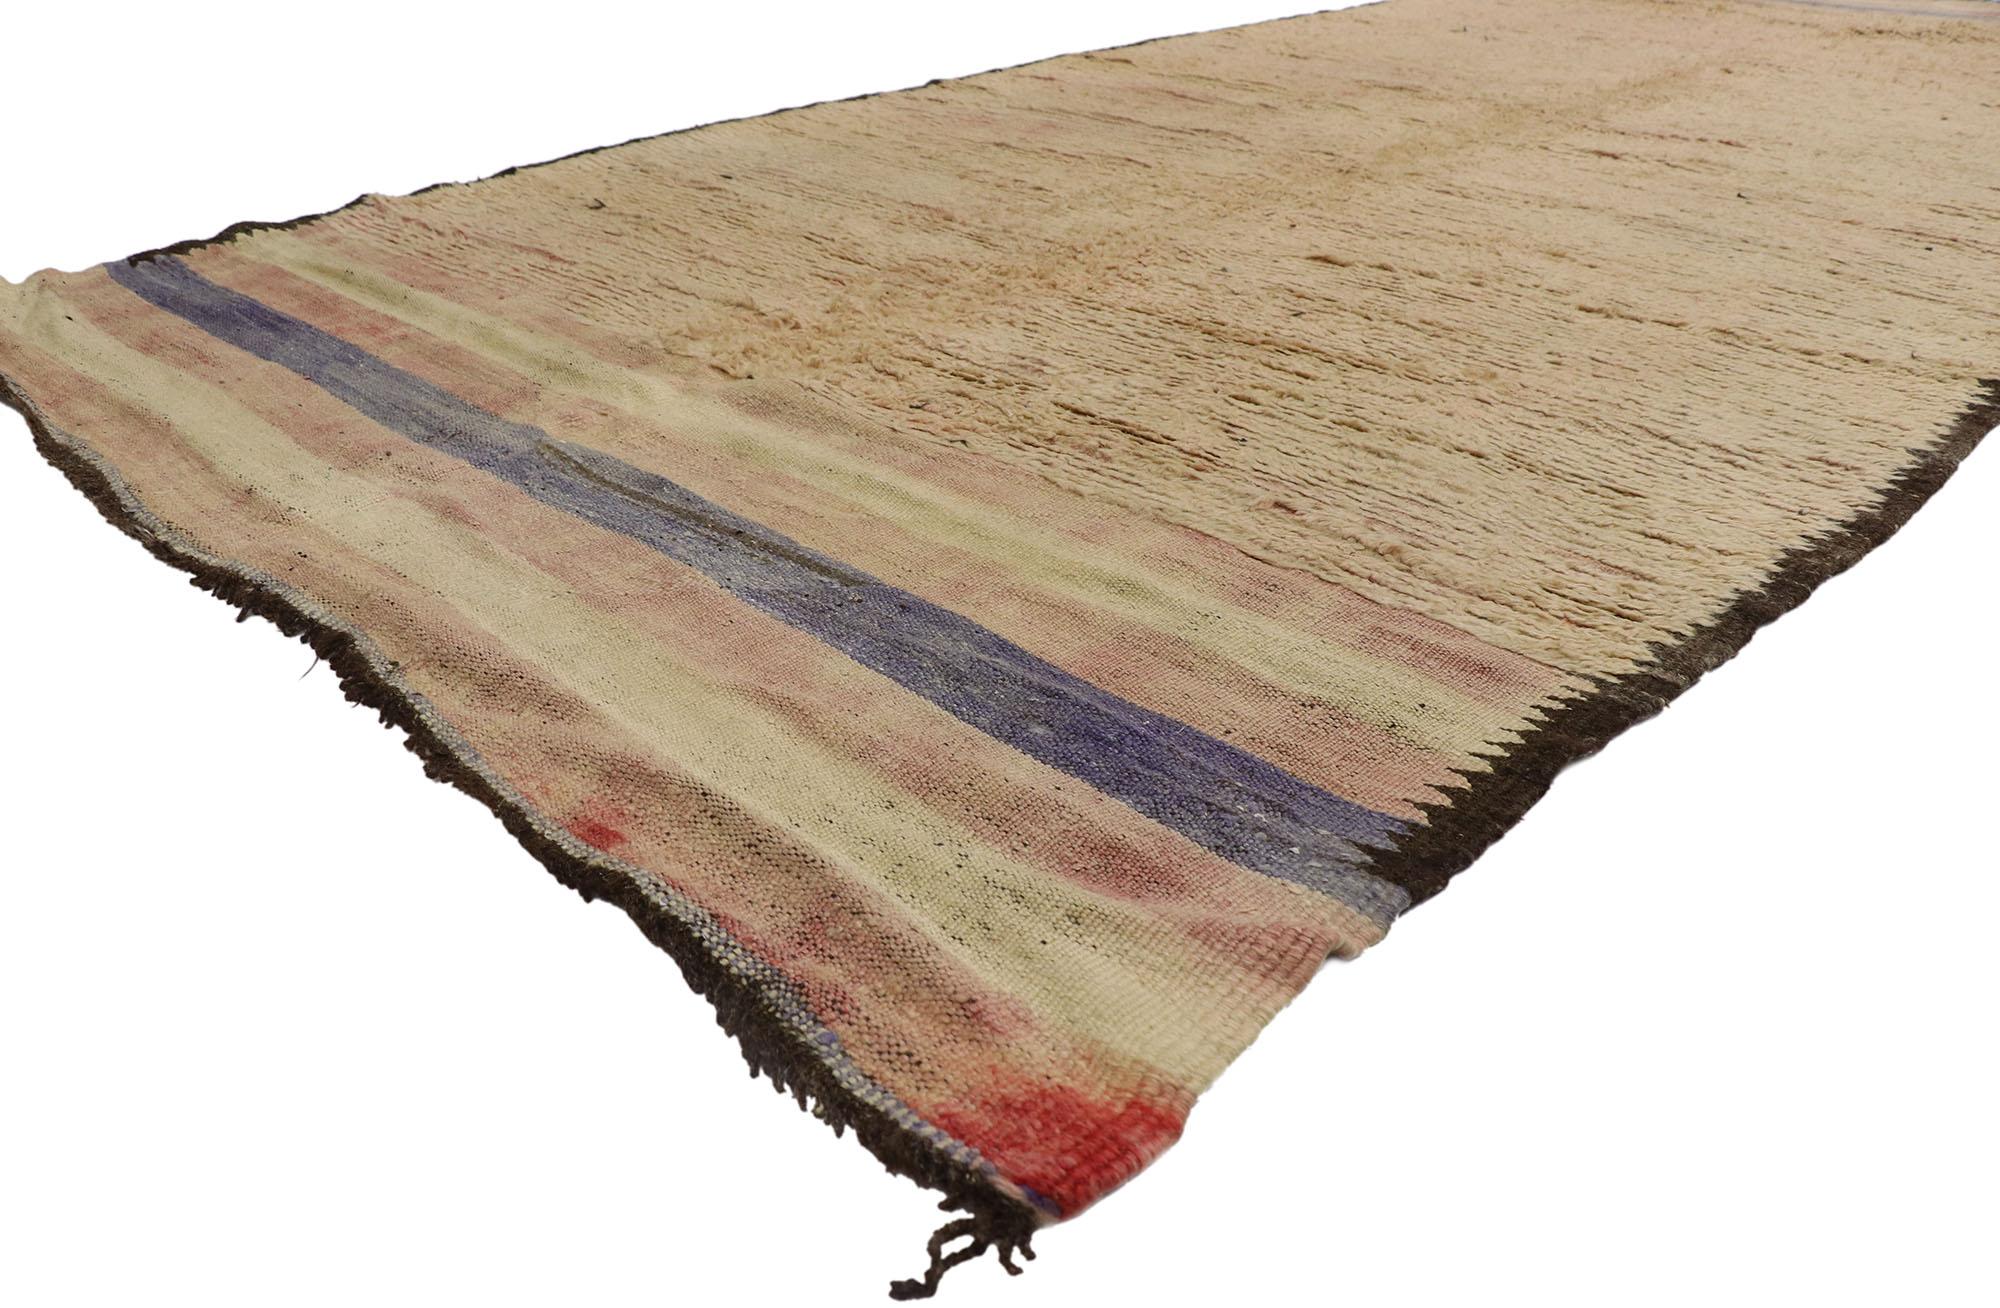 21650 Vintage Berber Moroccan rug with Bohemian Style 06'07 x 15'03. With its simplicity, plush pile and Bohemian vibes, this hand knotted wool vintage Berber Moroccan rug is a captivating vision of woven beauty. Imbued with light pink and beige